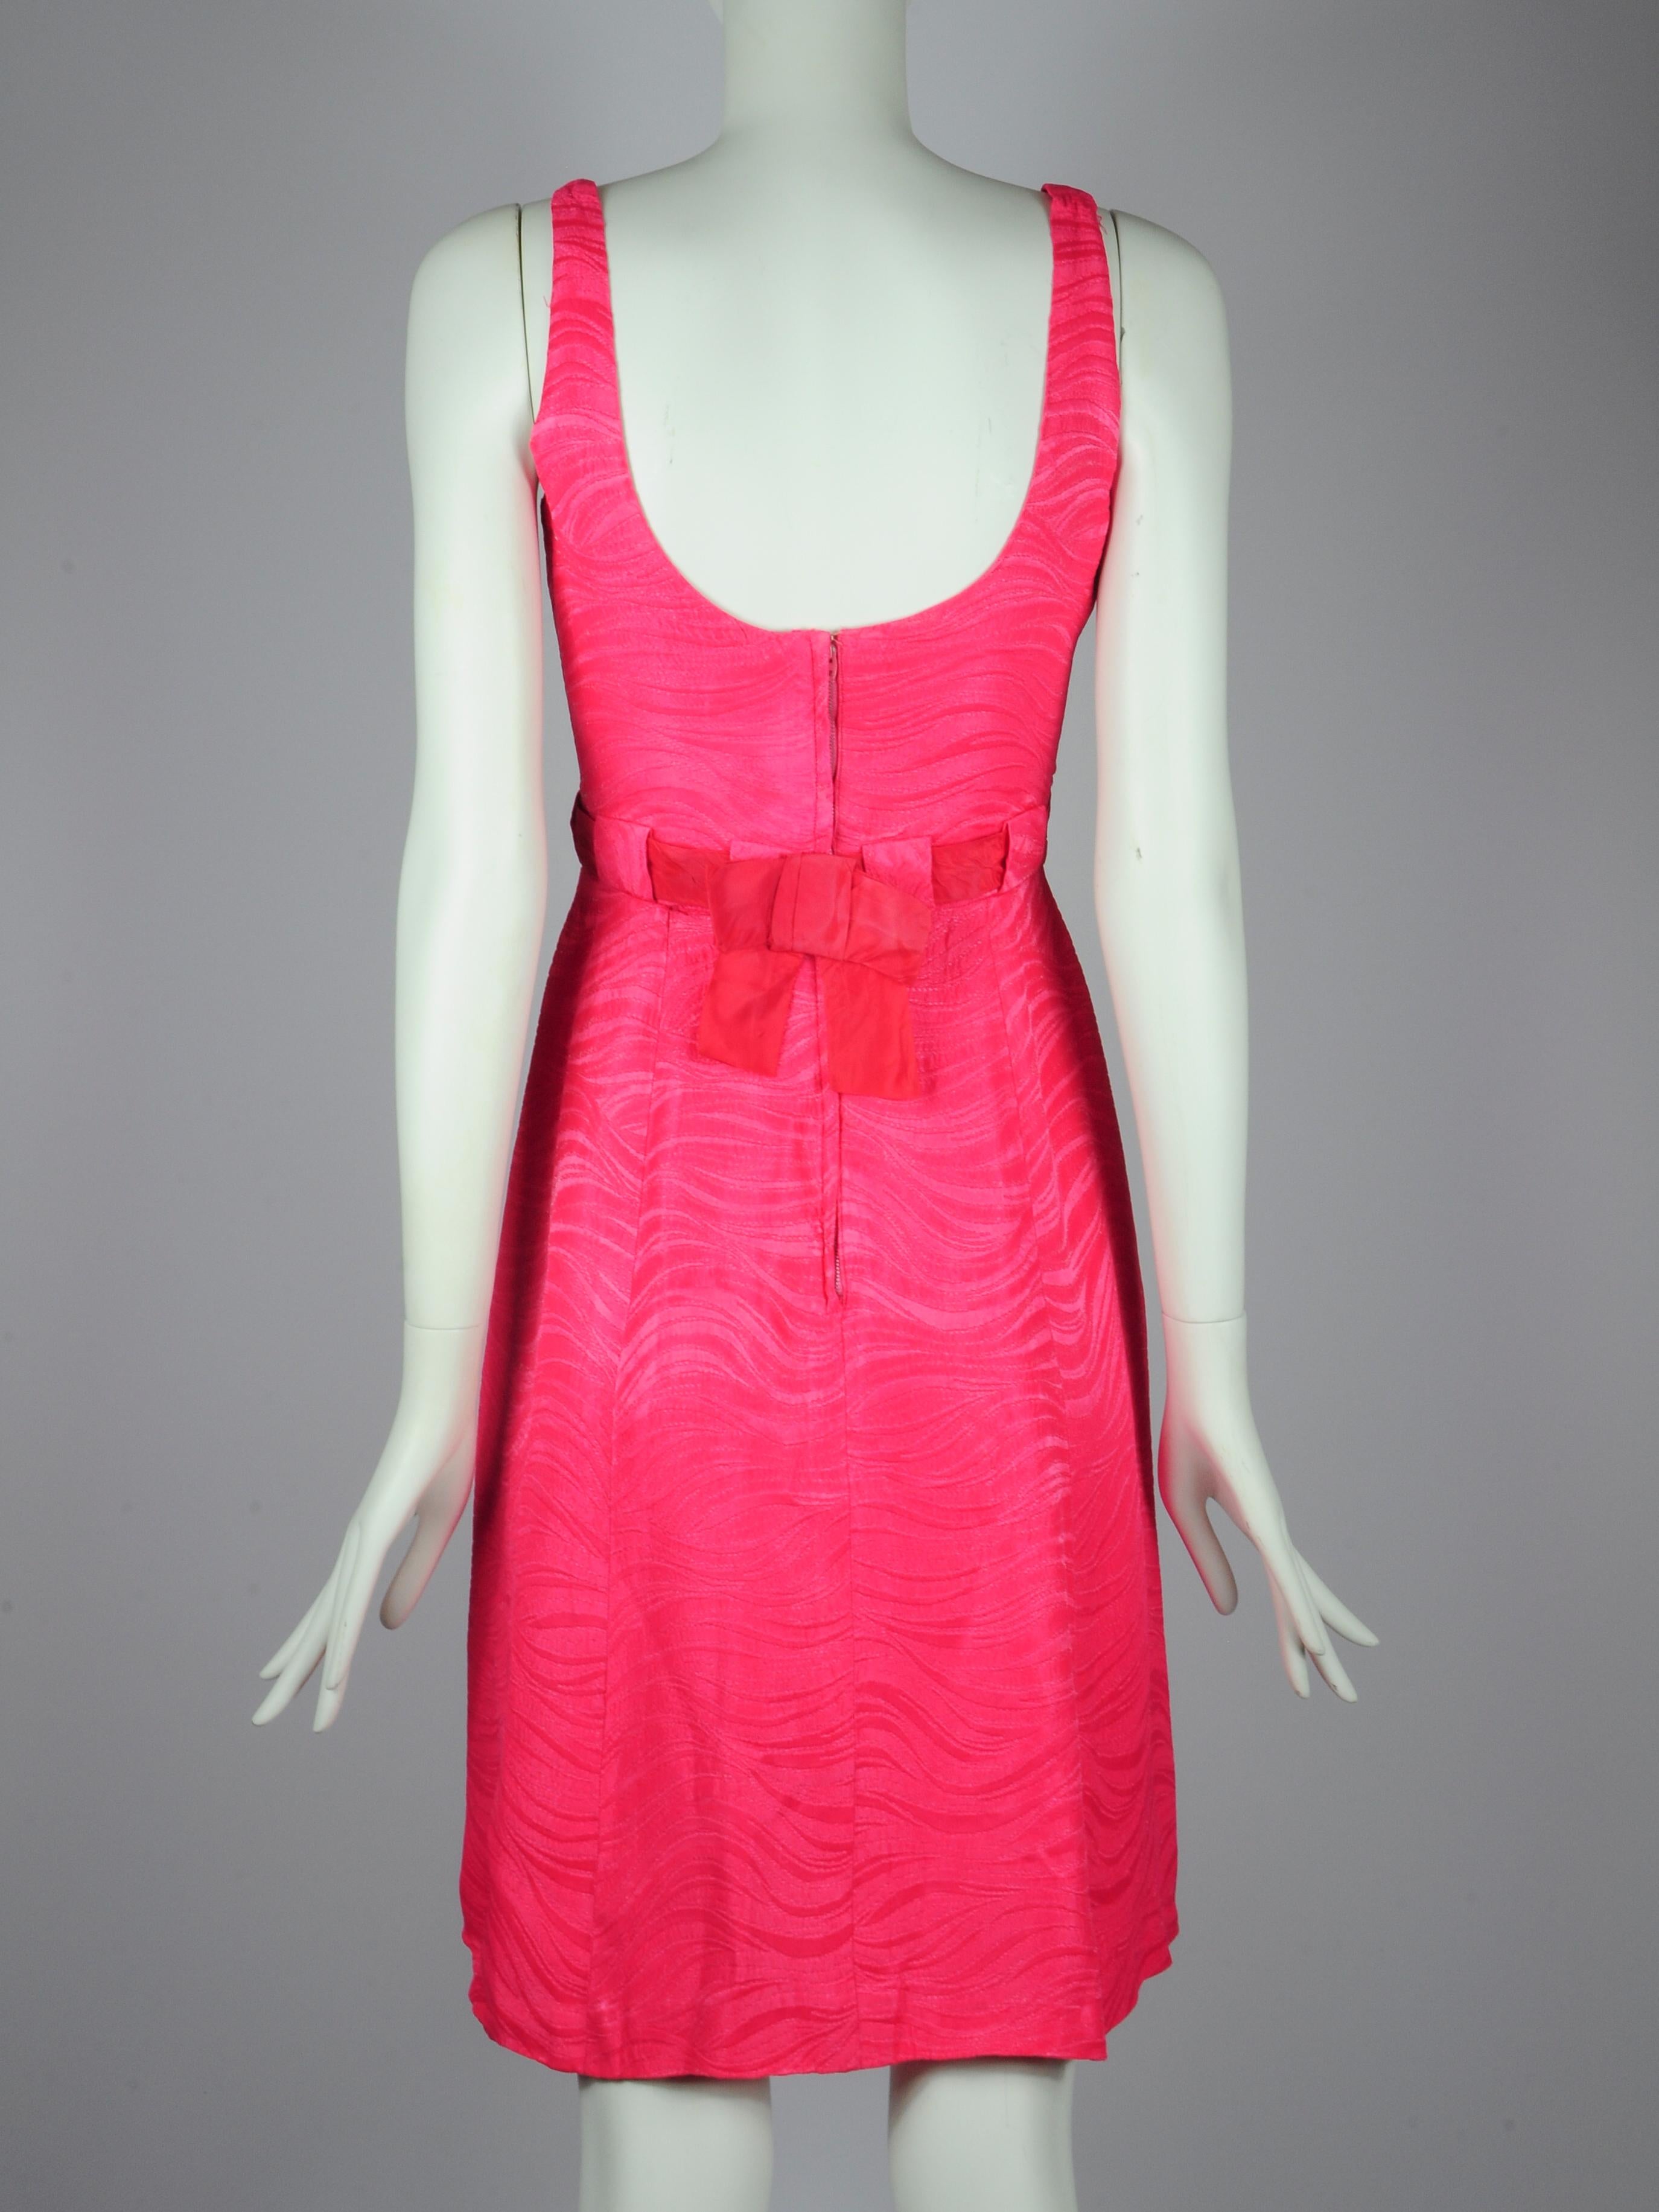 Jean Allen London Dress and Jacket Two Piece Set in Fuchsia Pink with Bow Detail For Sale 4